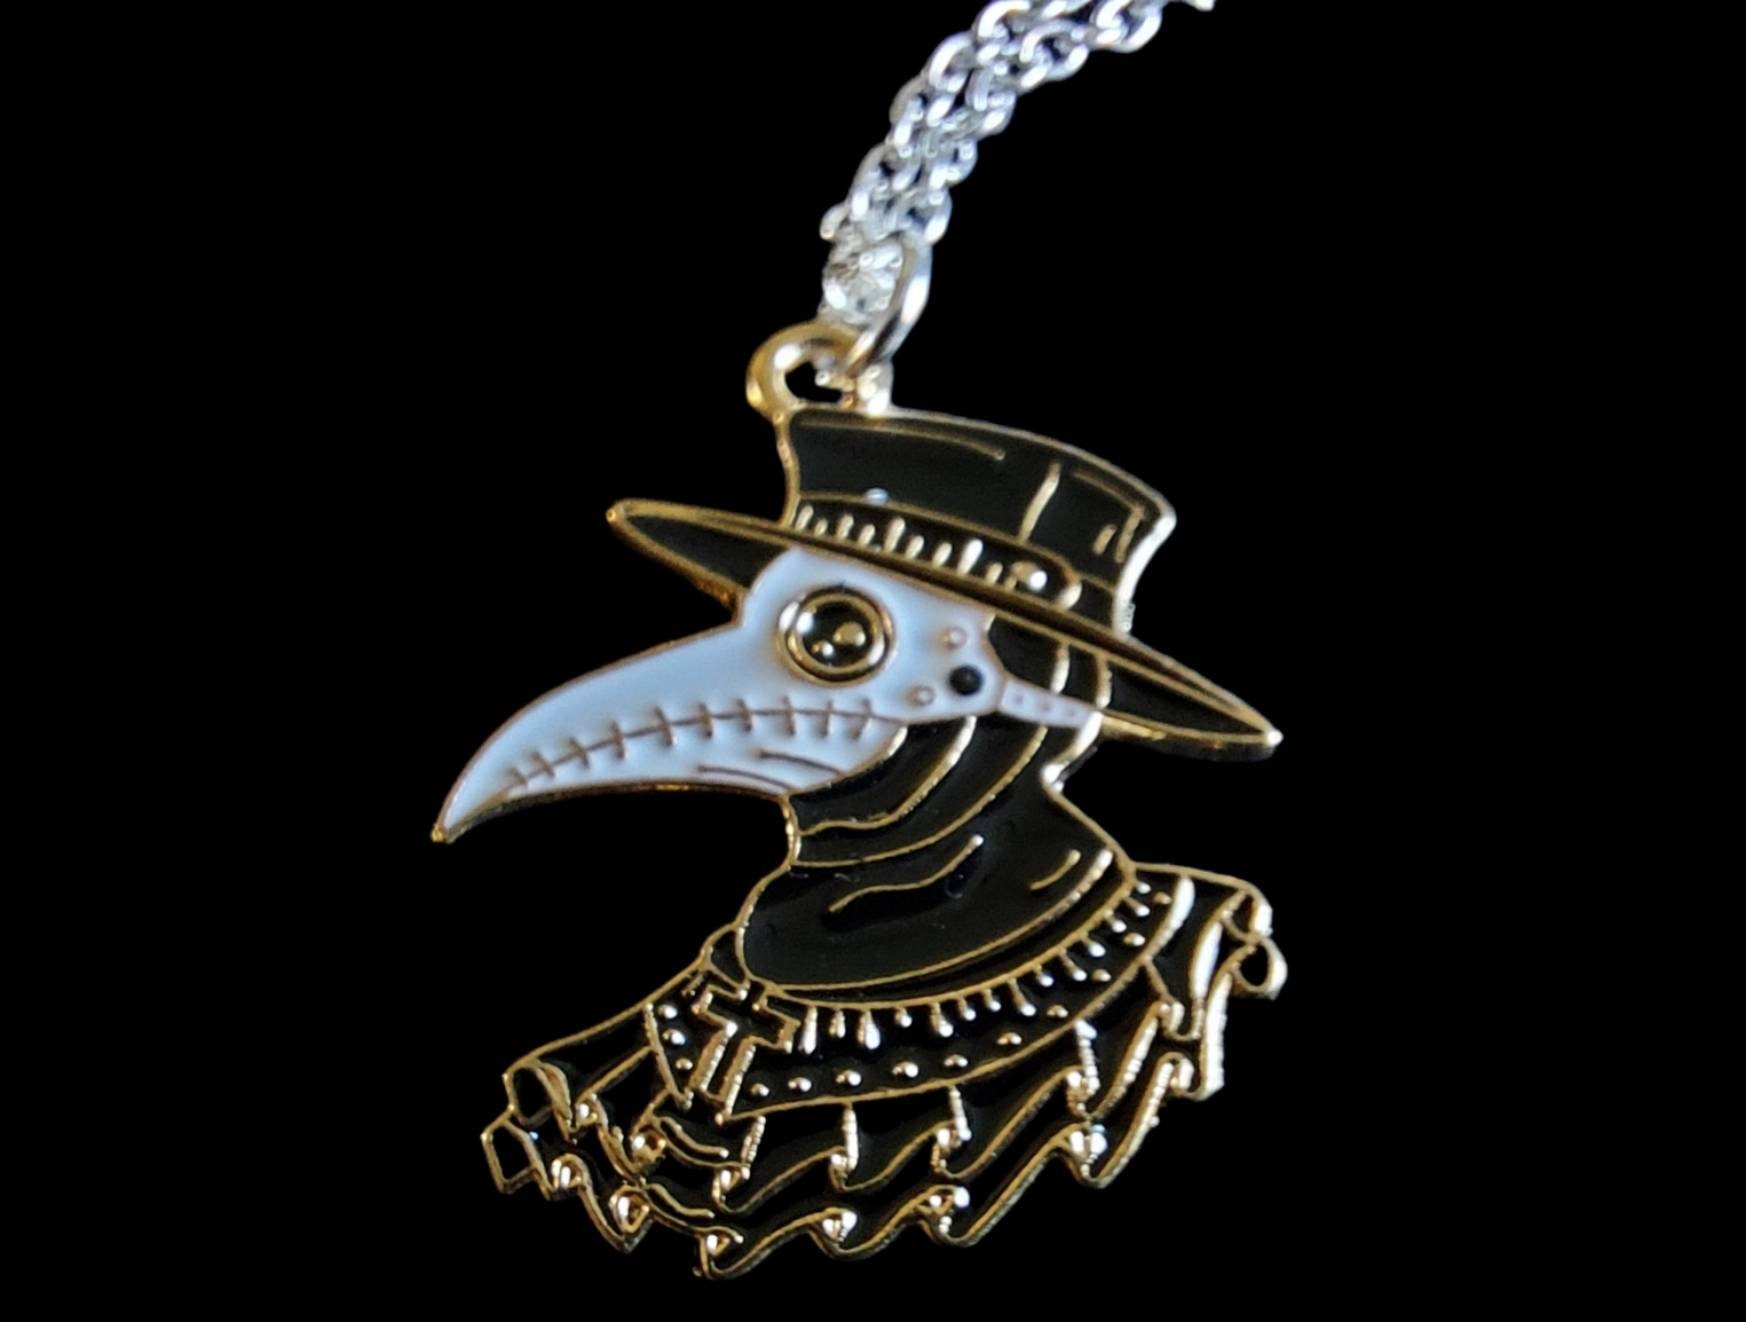 Grahamworks/Twistedleafstudio - Art & Jewelry - “The Plague Doctor” New in  my shop today is a very special pendant. This wearable art piece is based  on the medieval plague doctor. This intricate